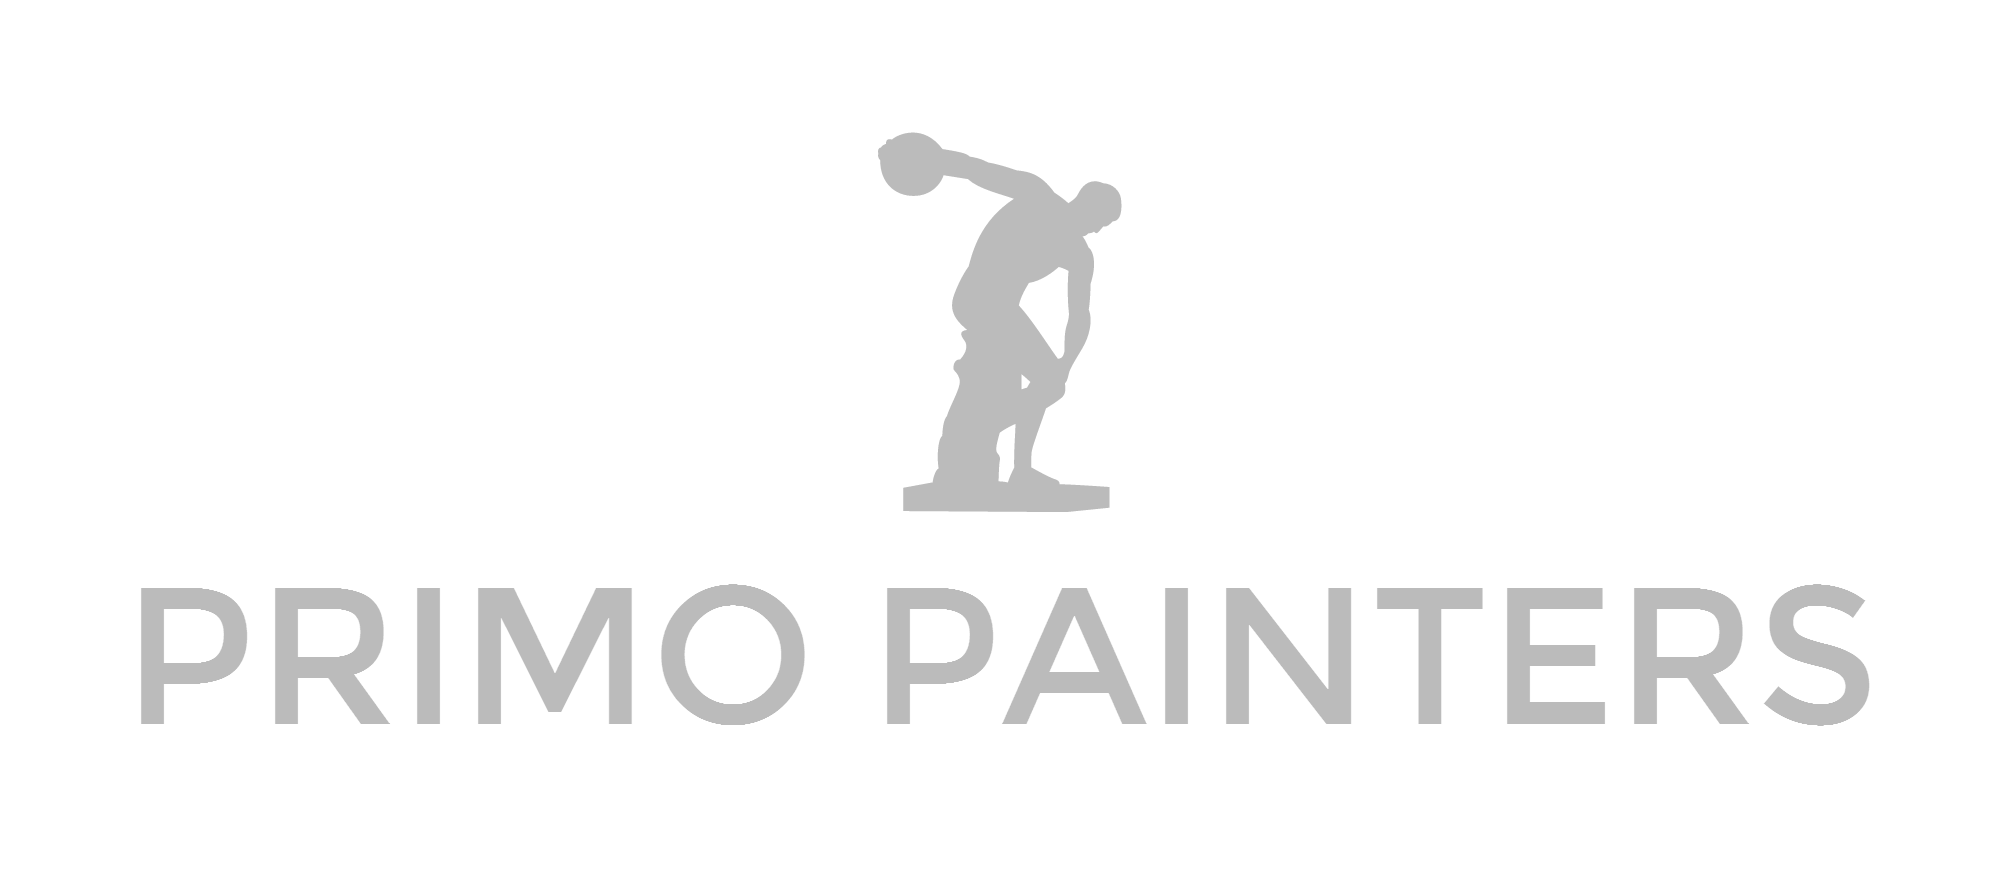 PRIMO PAINTERS-logo_1.fw.png